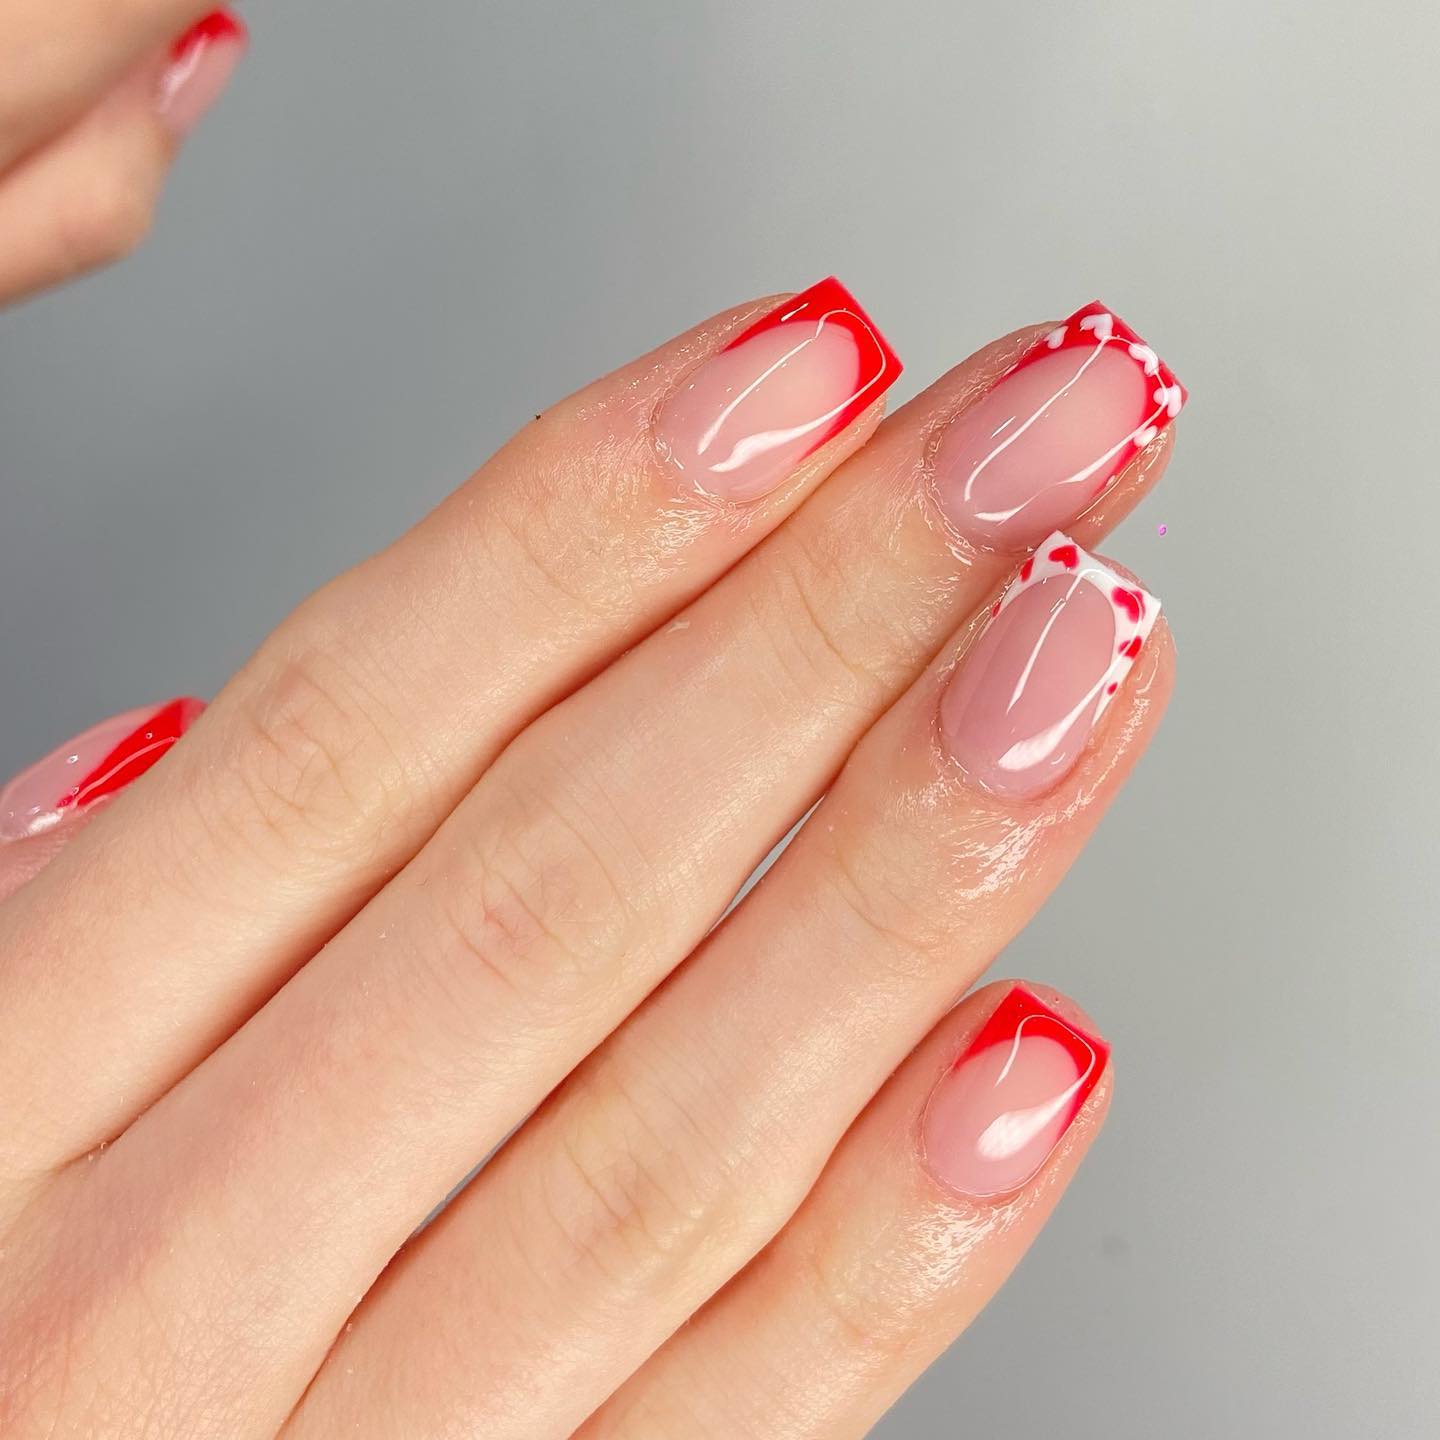 10+ Fabulous Ideas for Red and White French Tip Nails - Nail Designs Daily